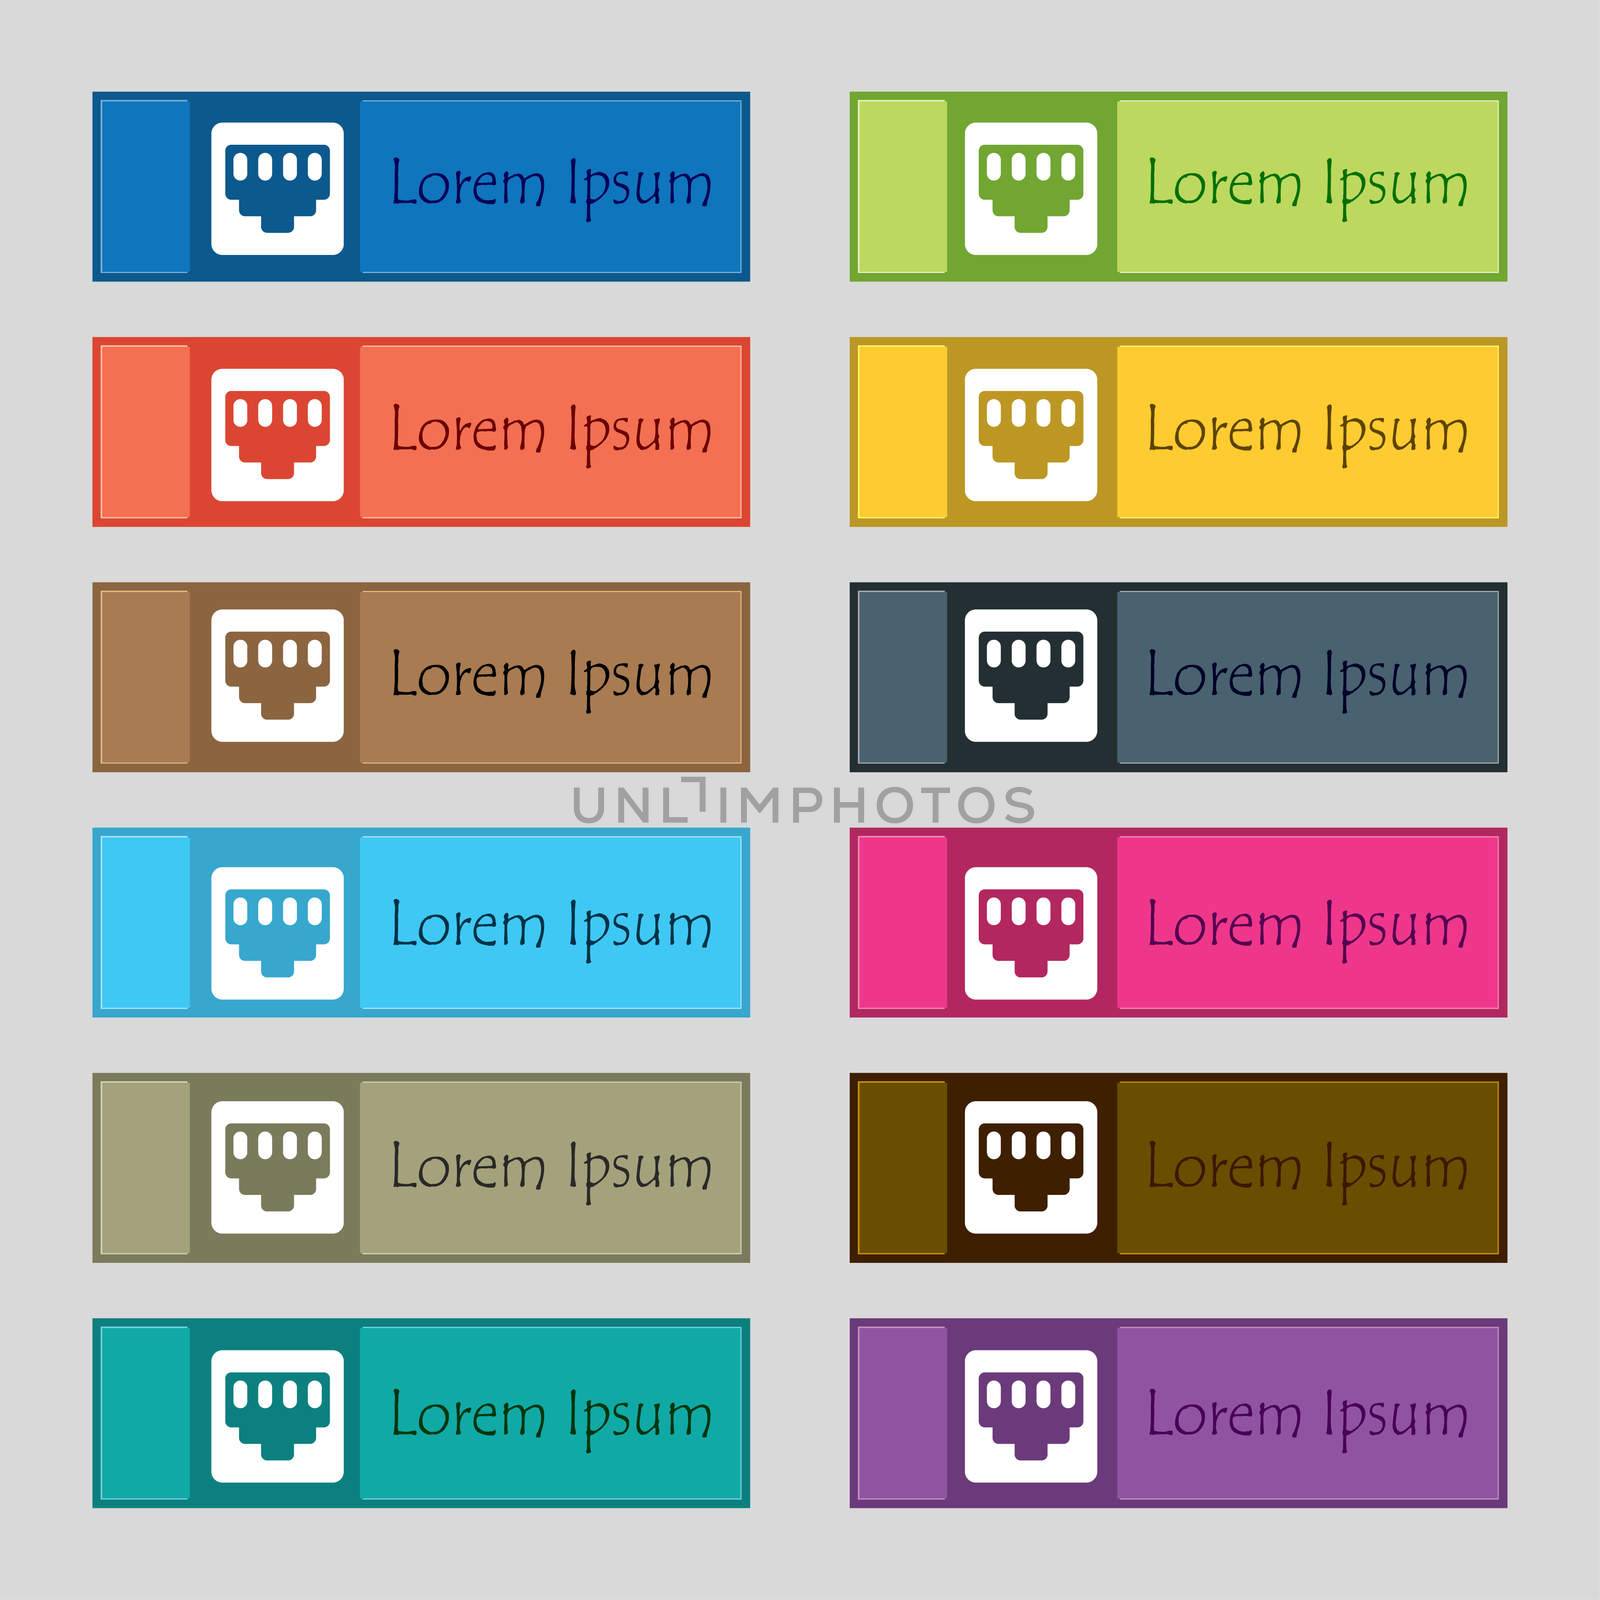 cable rj45, Patch Cord icon sign. Set of twelve rectangular, colorful, beautiful, high-quality buttons for the site. illustration